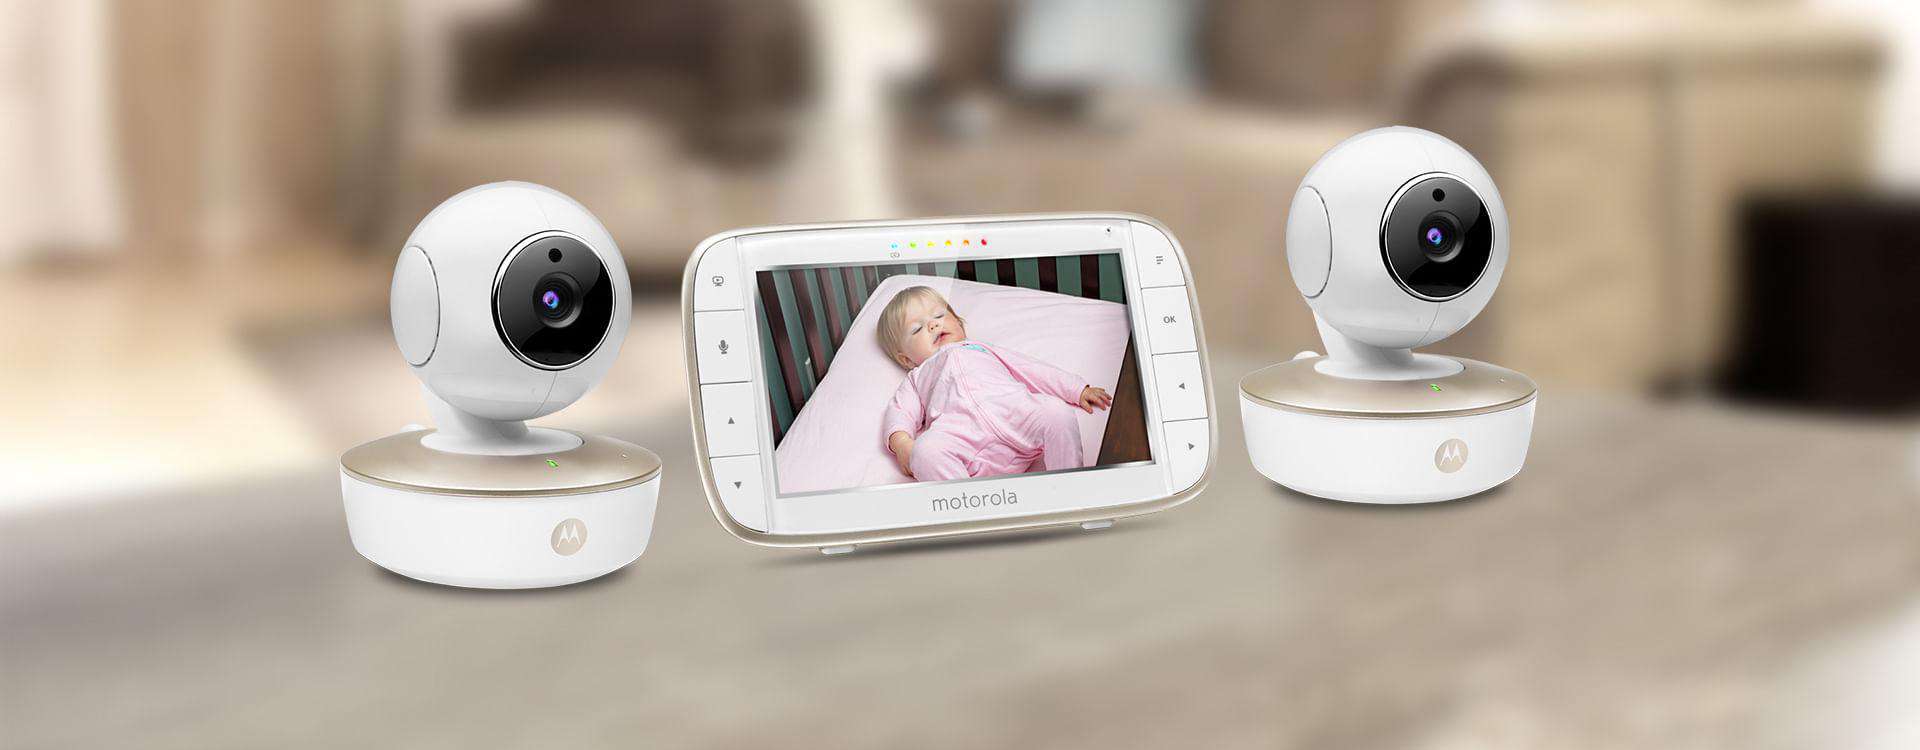 When working with two cameras, the Motorola parenting device enables split-screen or standard viewing.  - Samsung vs Motorola Baby Monitor | Baby Journey 